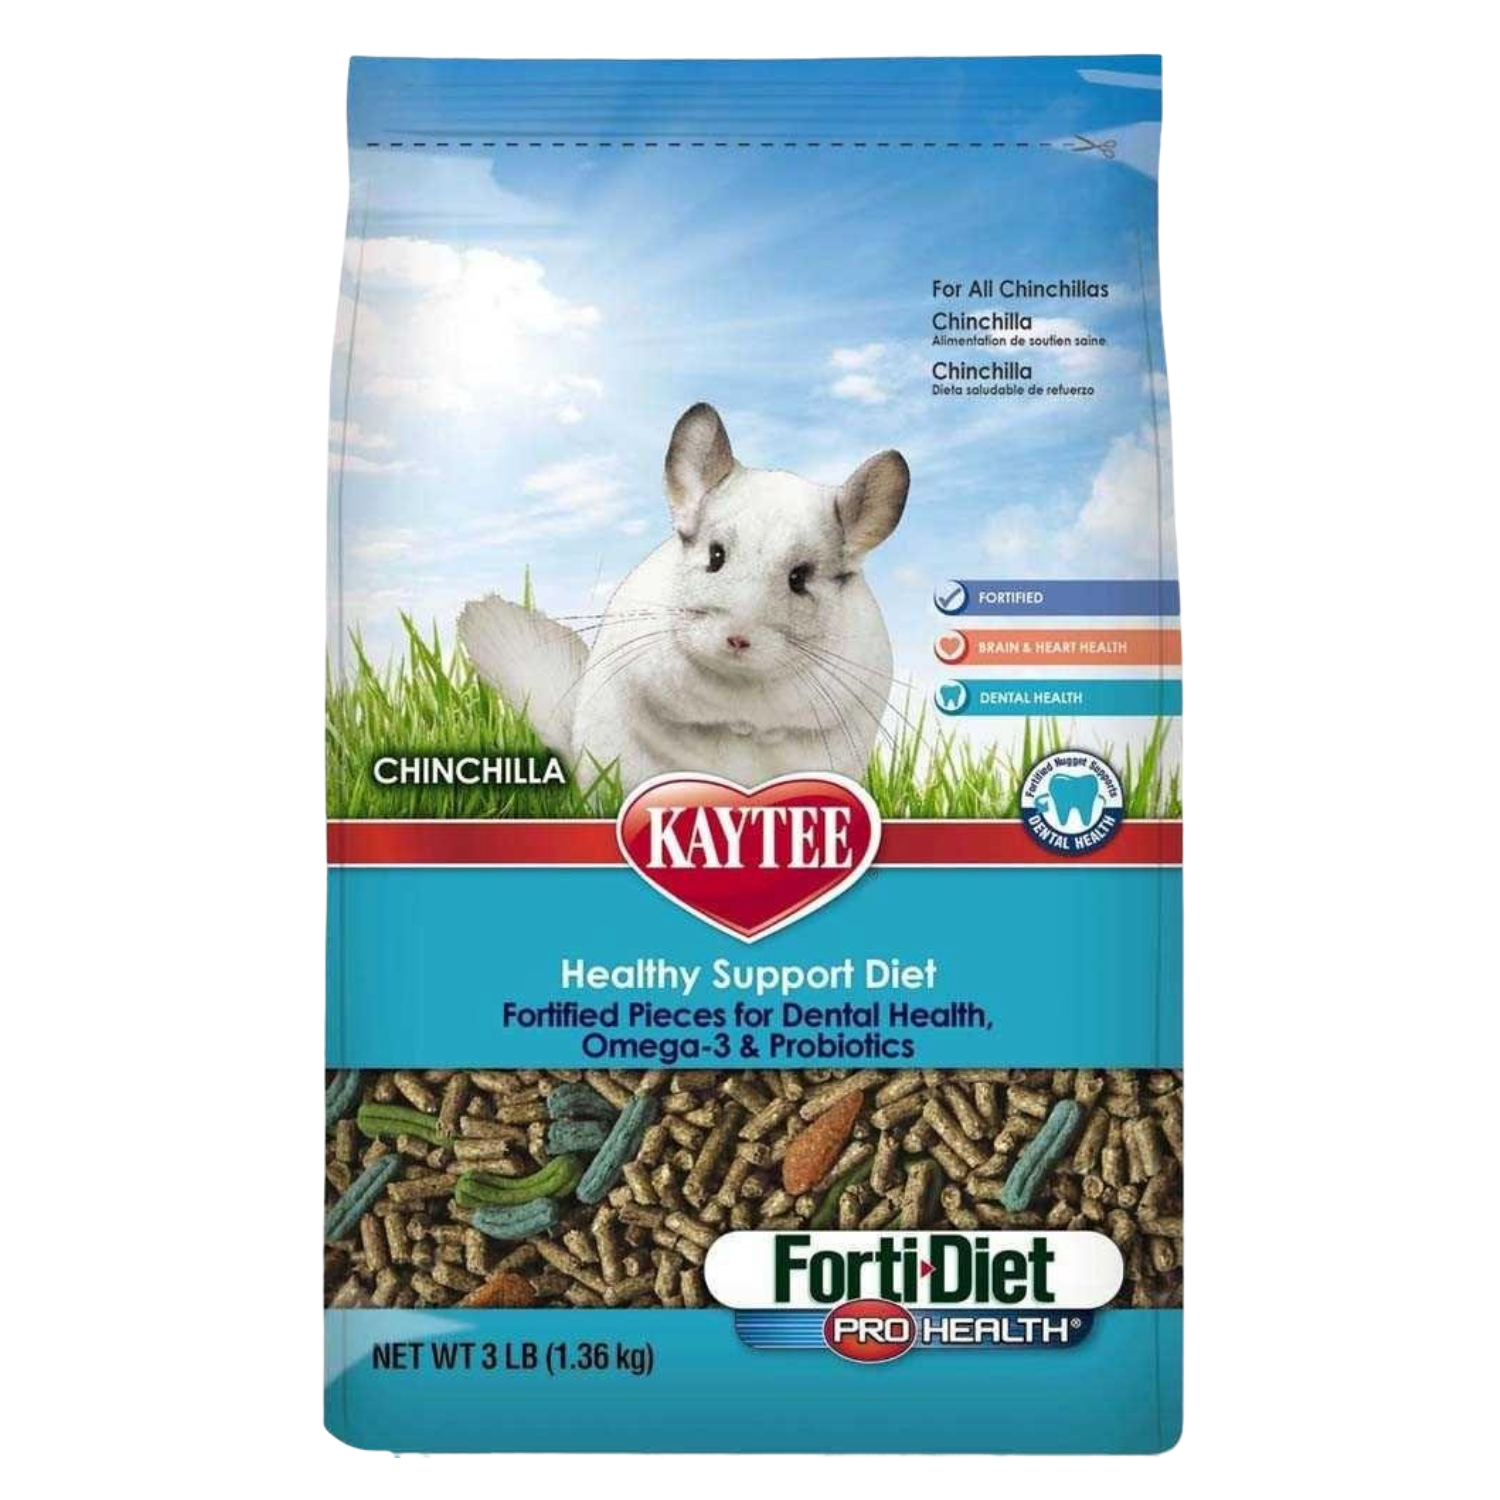 [DISCONTINUED] Kaytee Forti-Diet Pro Health for Chinchillas - 1.36kg